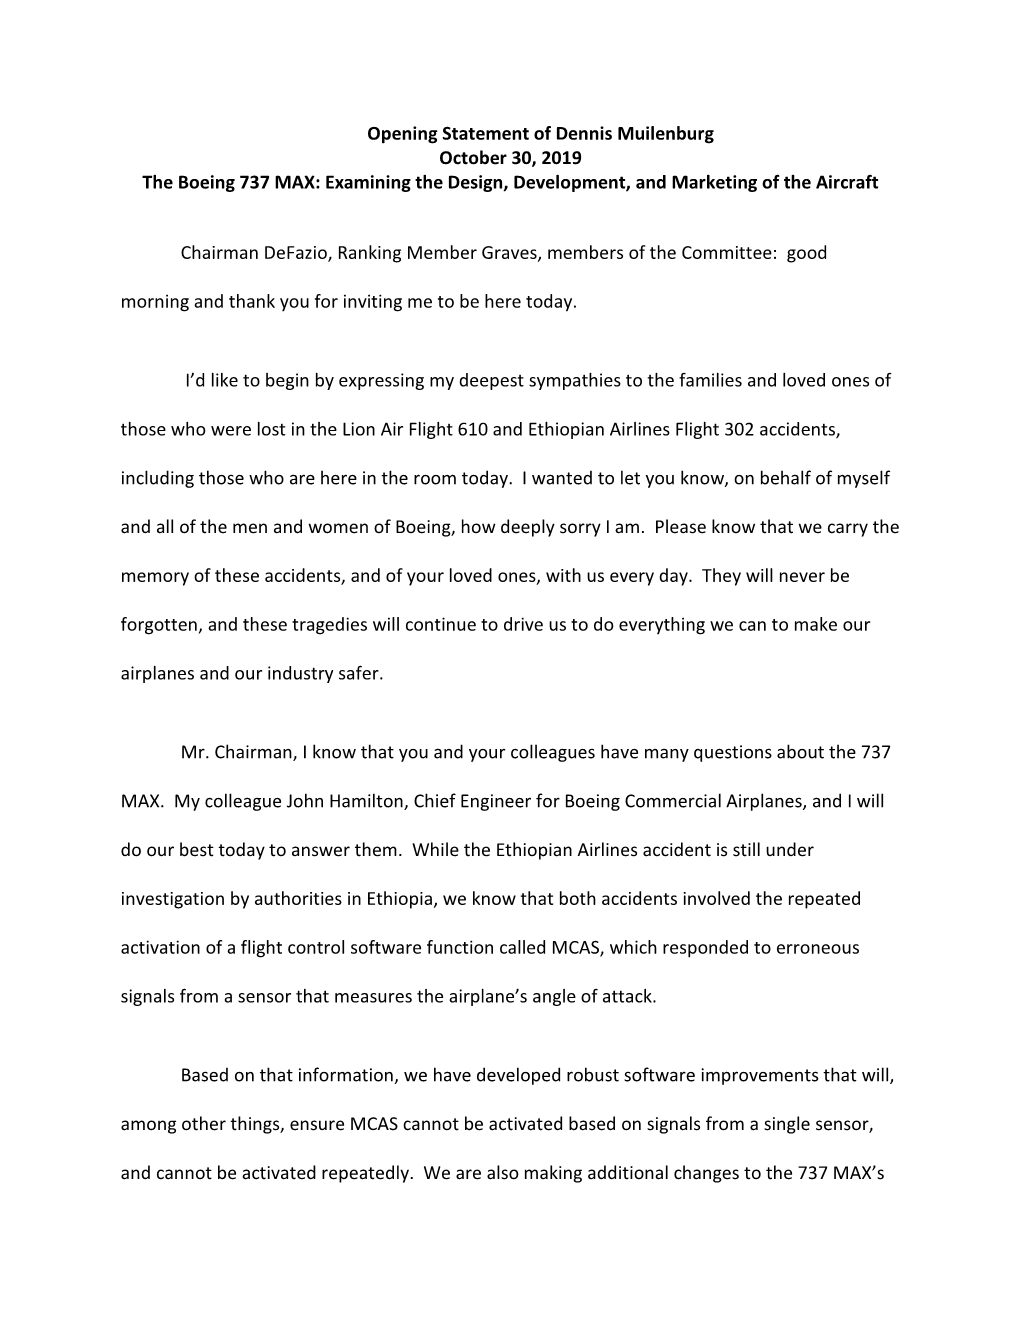 Opening Statement of Dennis Muilenburg October 30, 2019 the Boeing 737 MAX: Examining the Design, Development, and Marketing of the Aircraft